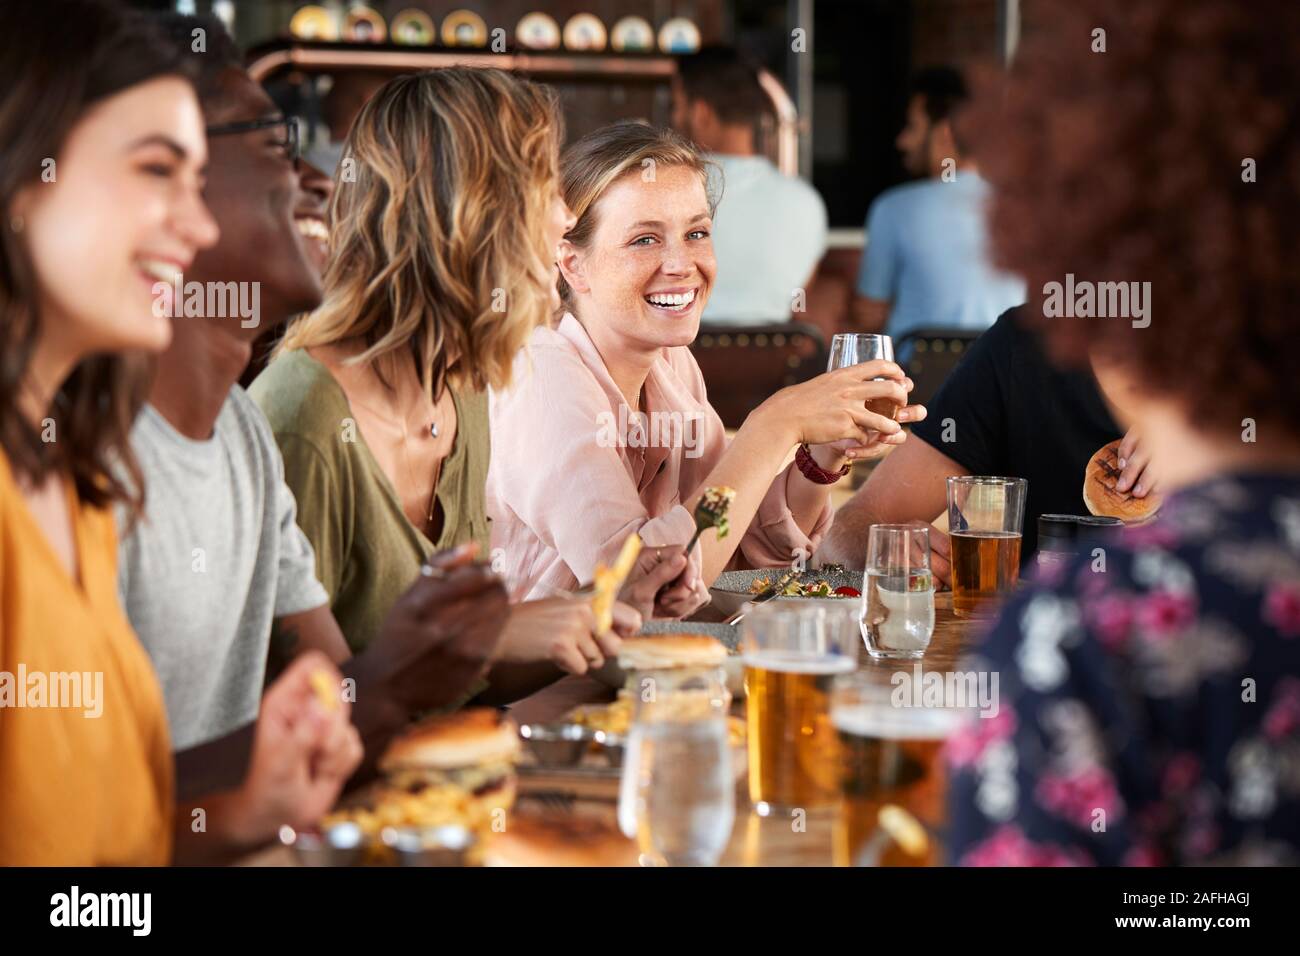 Group Of Young Friends Meeting For Drinks And Food In Restaurant Stock Photo